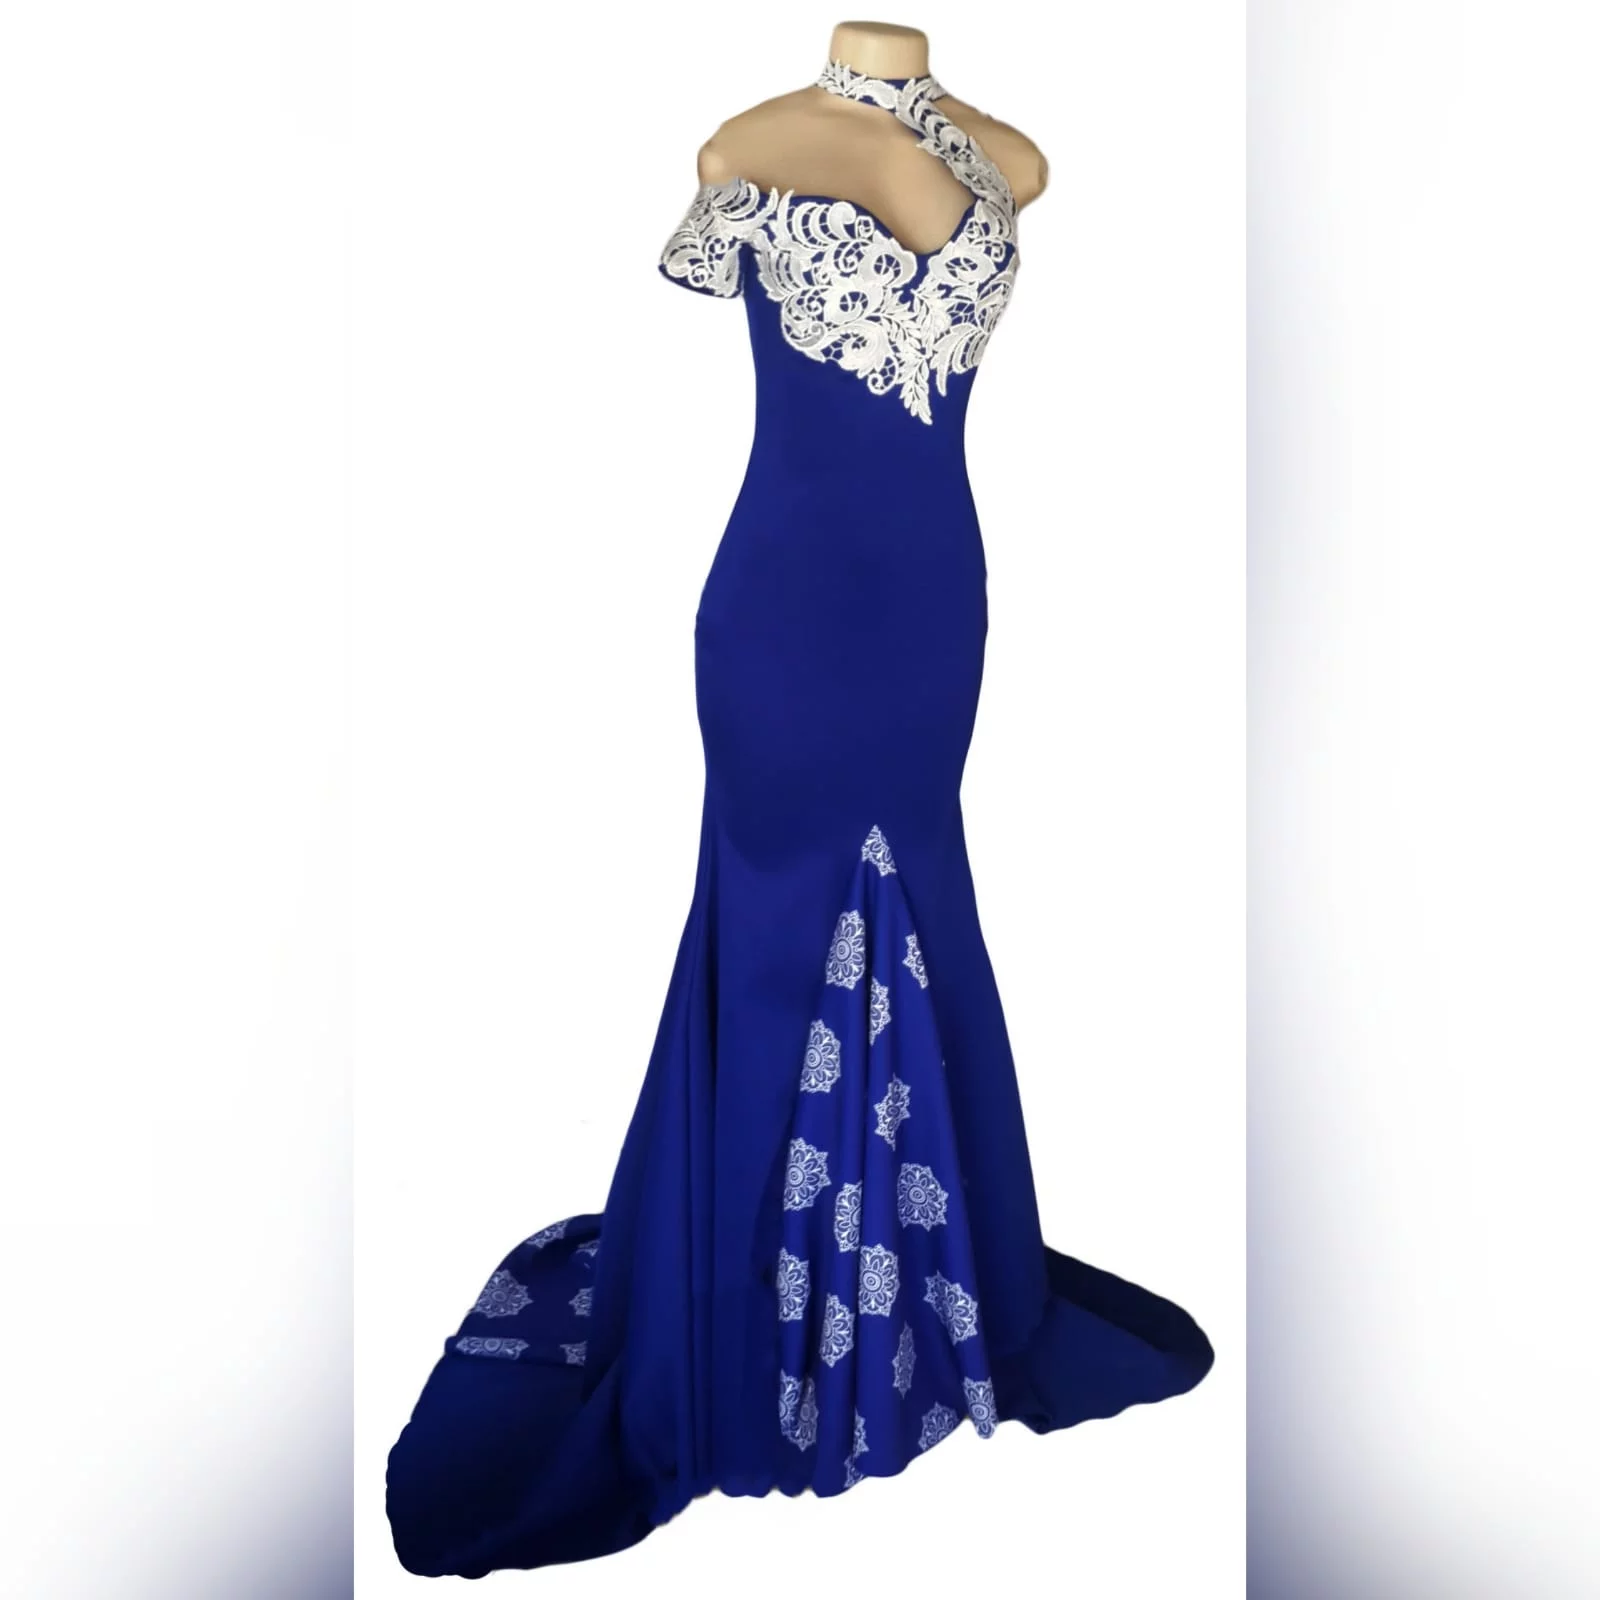 Royal blue and white pageant dress 5 royal blue and white soft mermaid pageant evening dress, with a choker neckline, with one off shoulder short sleeve. Dress has a front and back panel with a print. Dress has a train